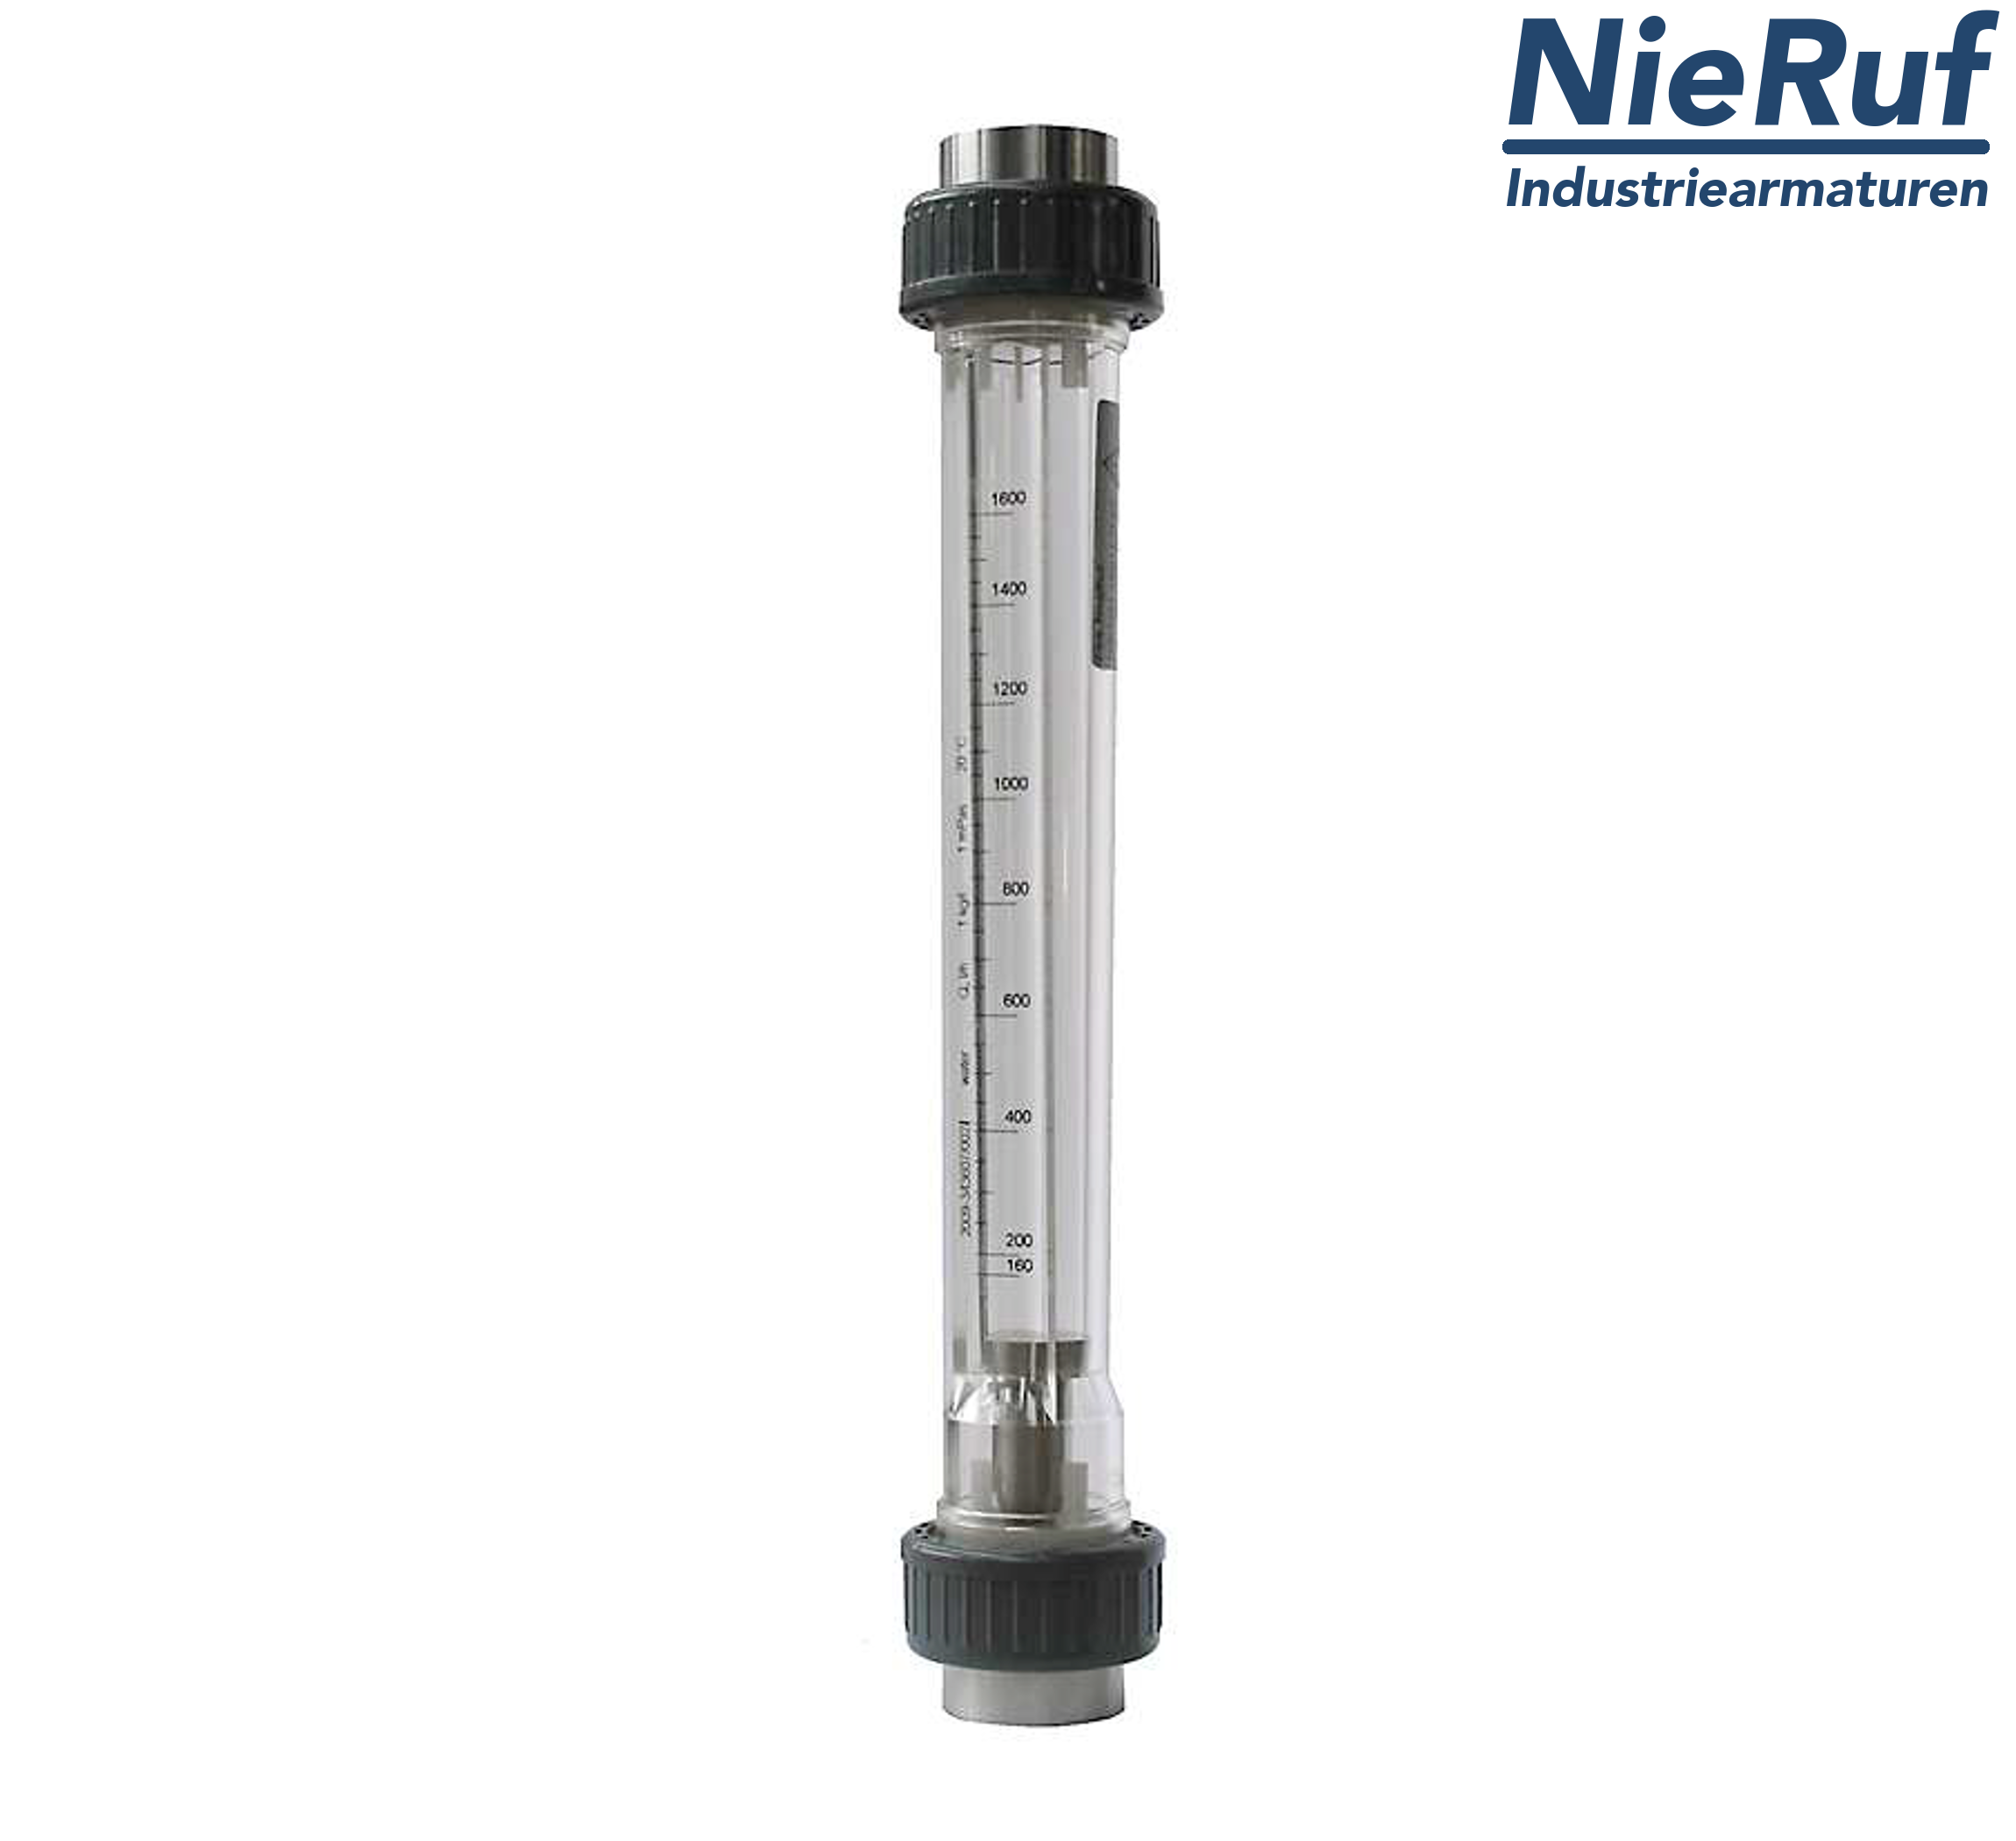 Variable area flowmeter 1" inch 160.0 - 1600 l/h water NBR